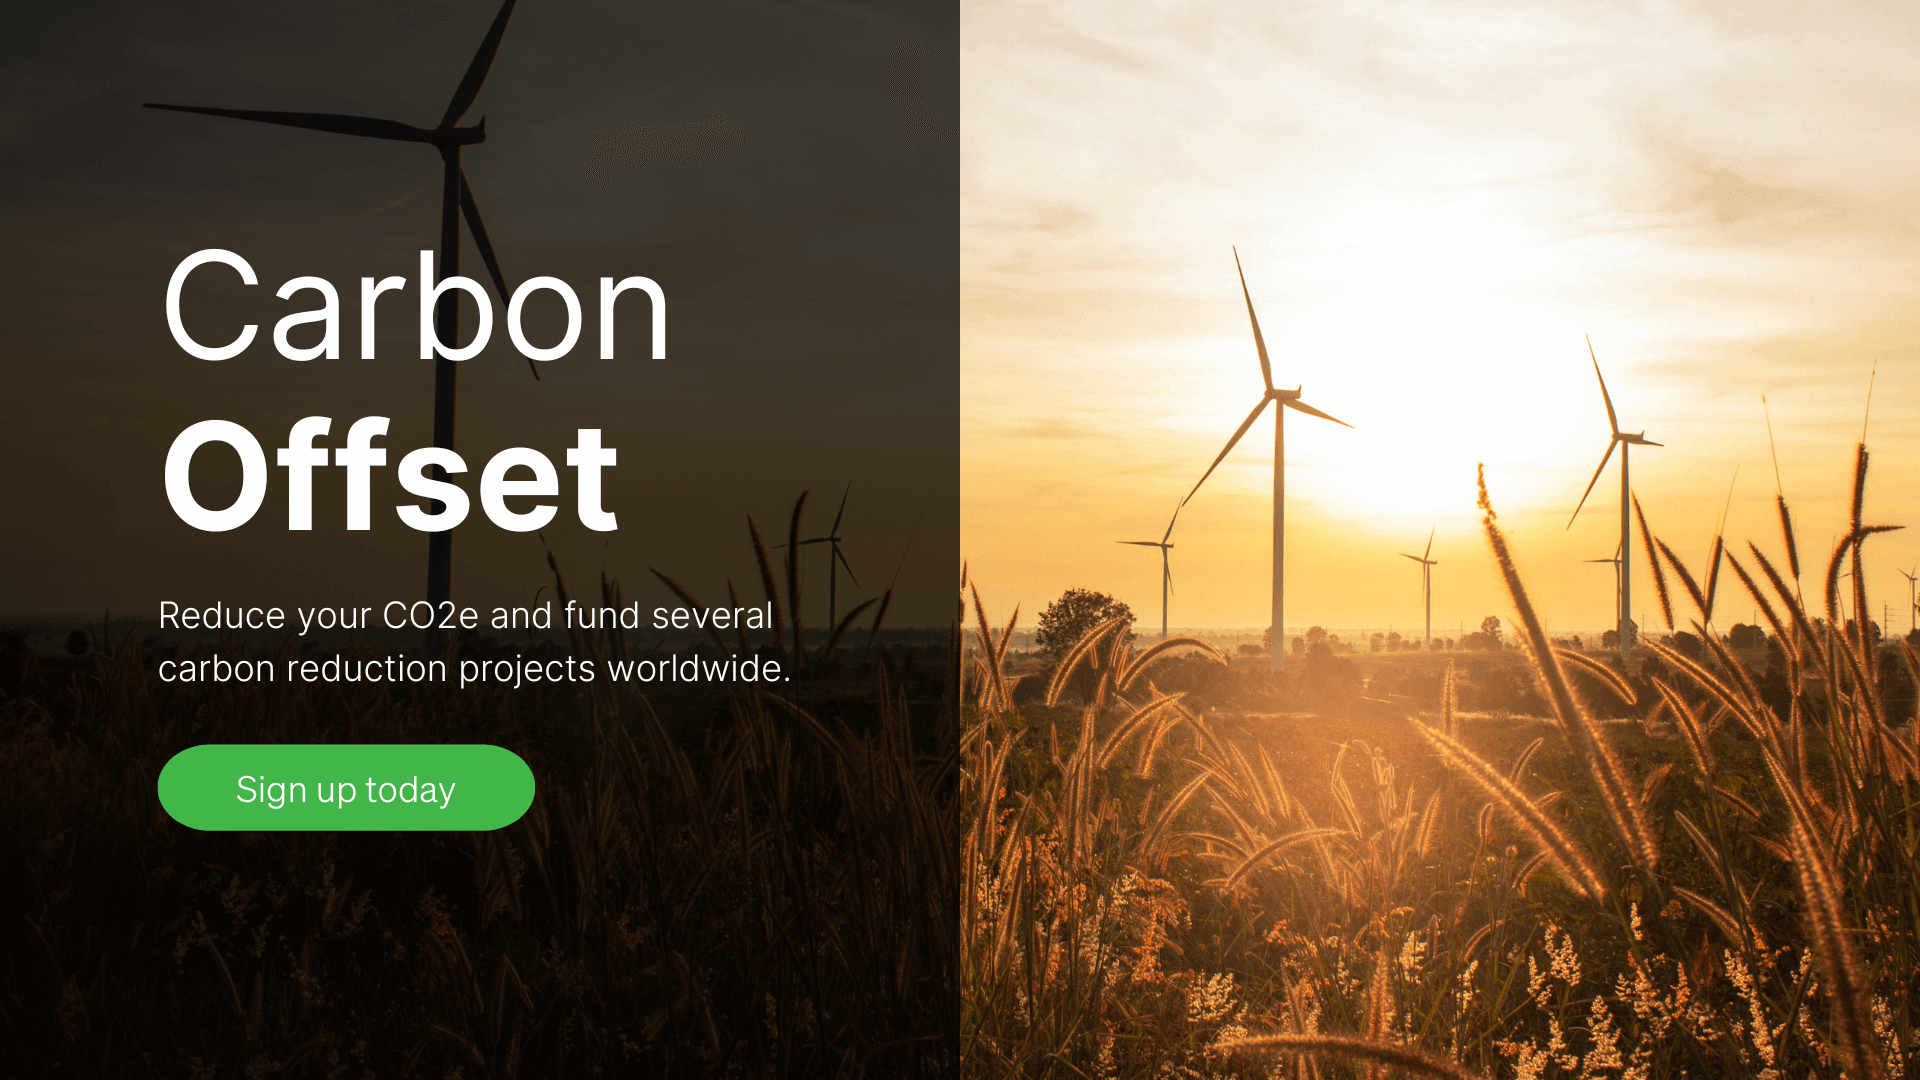 Carbon Offset your fuel card purchases website page header image with windfarm, sunset and crops.